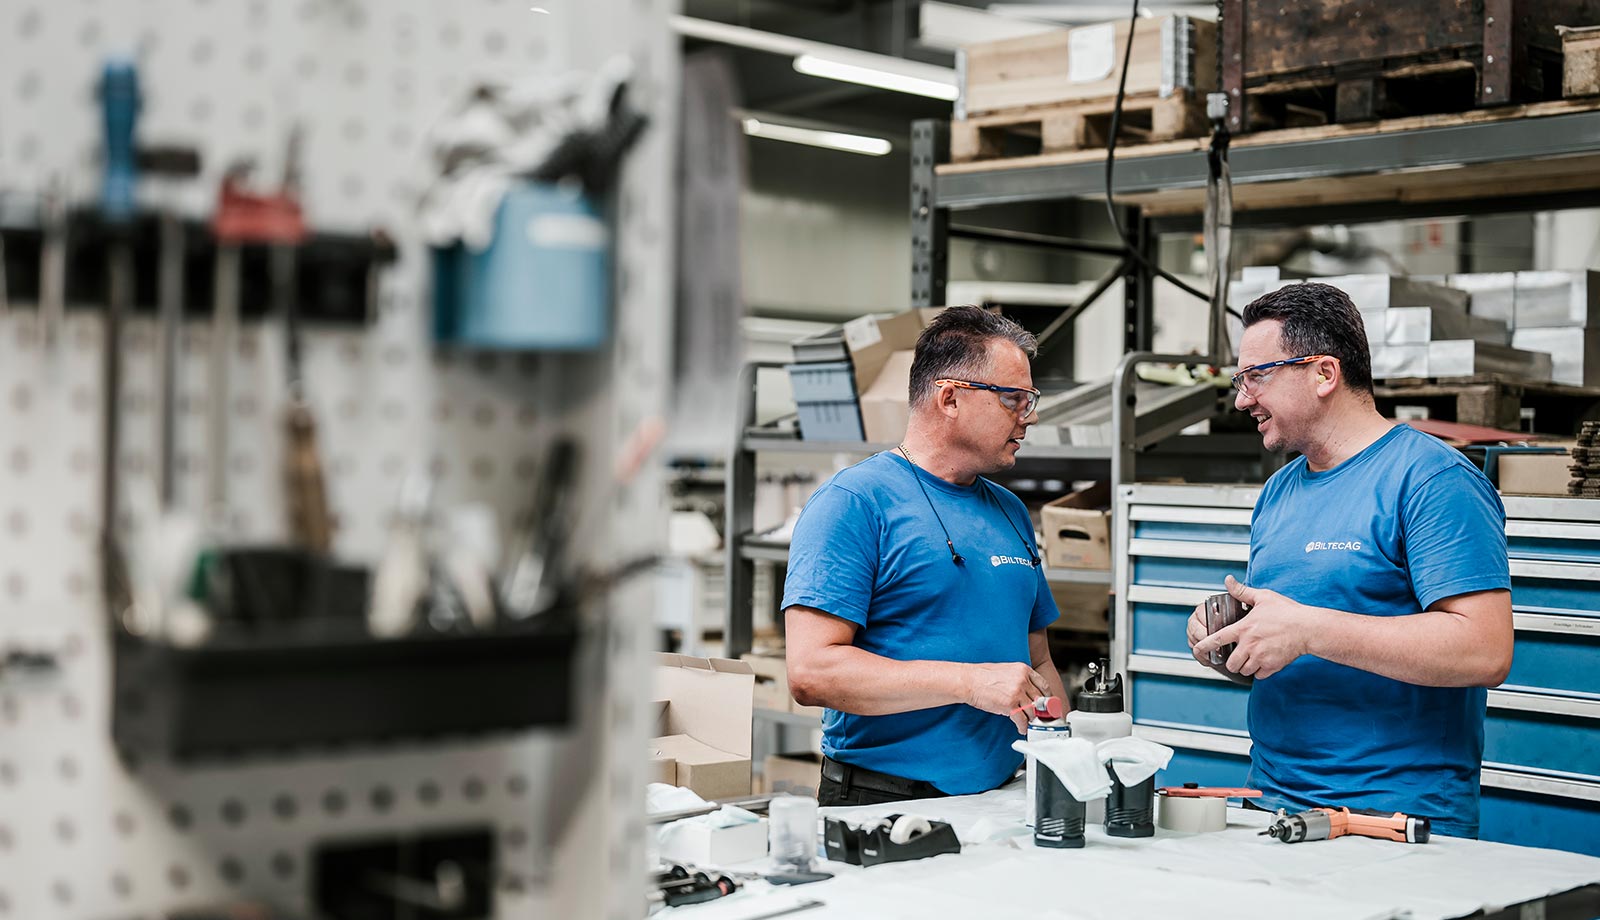 Employees of Biltec AG in a technical discussion, standing in the workshop, expressed through satisfied and happy body language. The scene illustrates the positive working atmosphere and cooperative teamwork in the company's production hall.